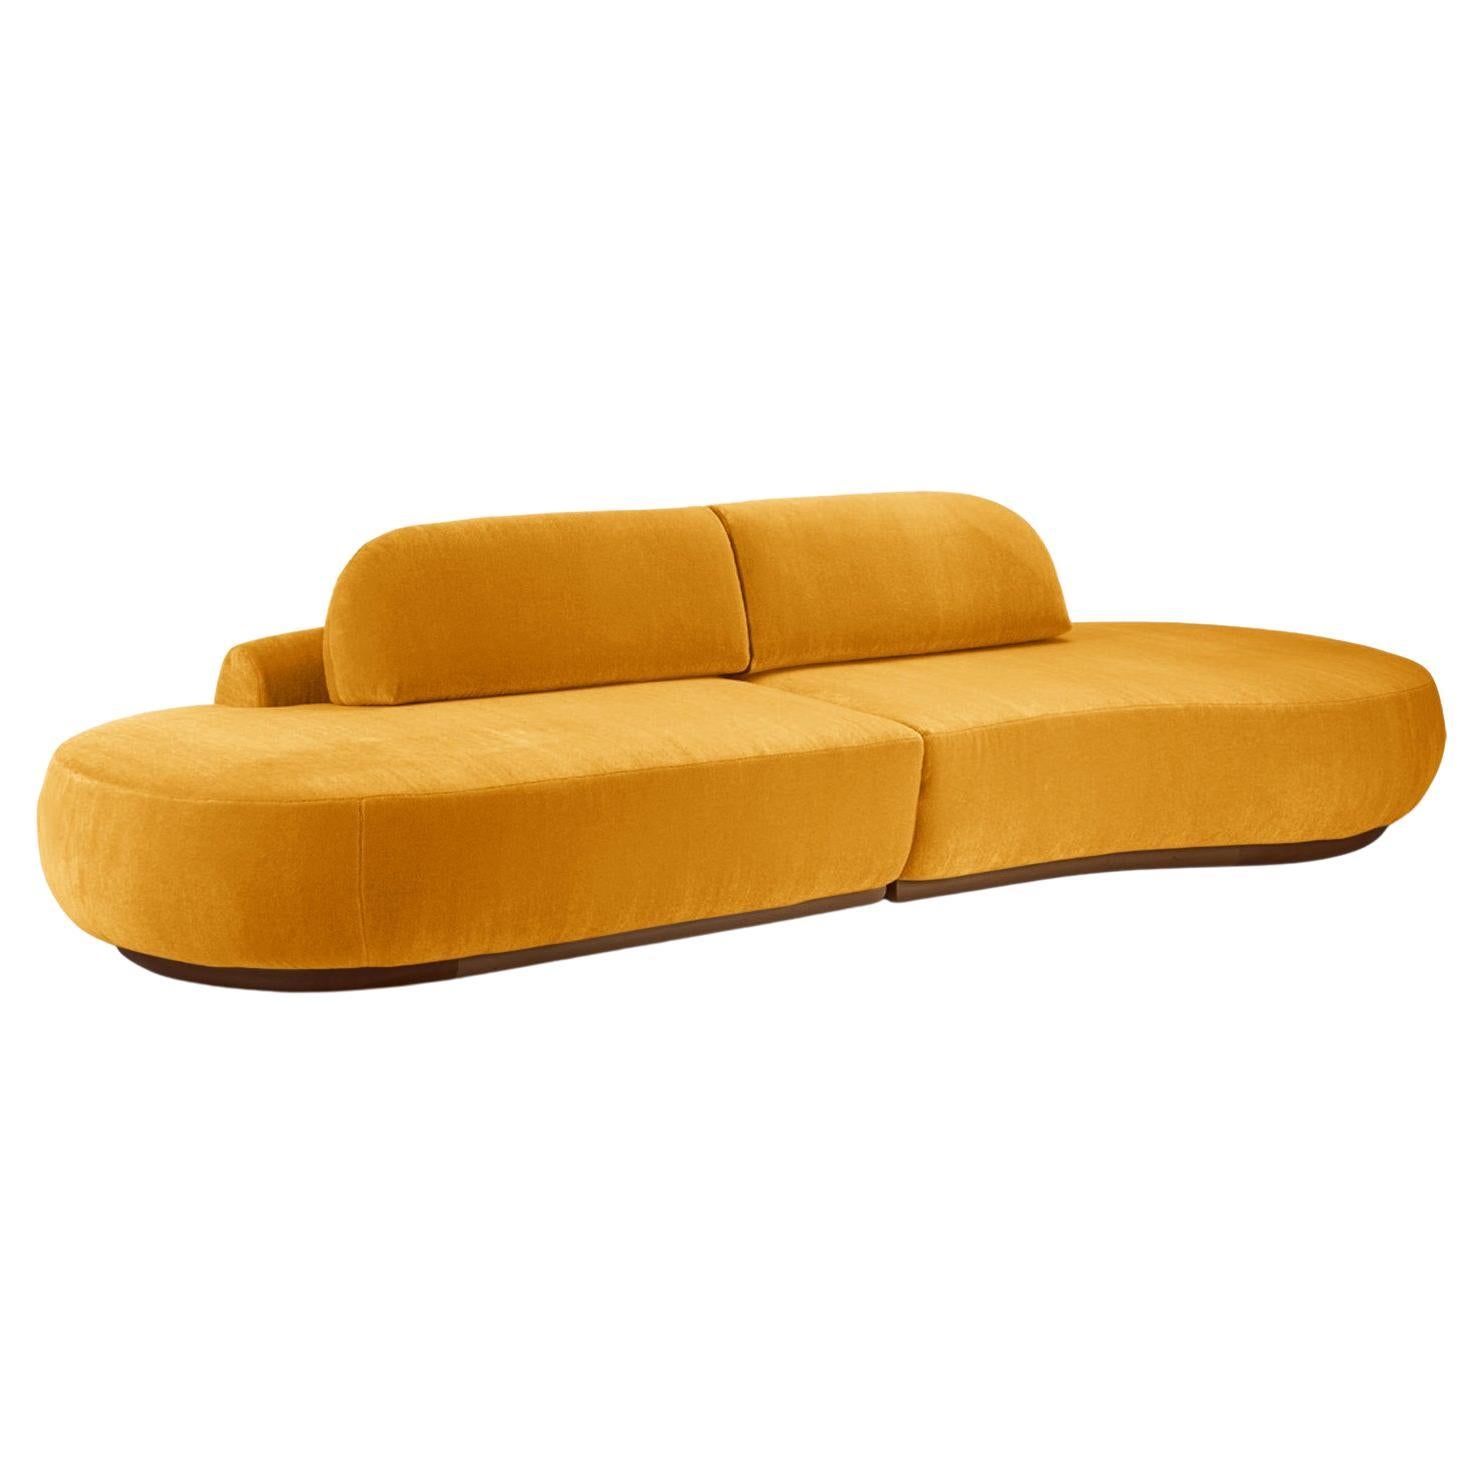 Naked Curved Sectional Sofa, 2 Piece with Beech Ash-056-1 and Corn For Sale